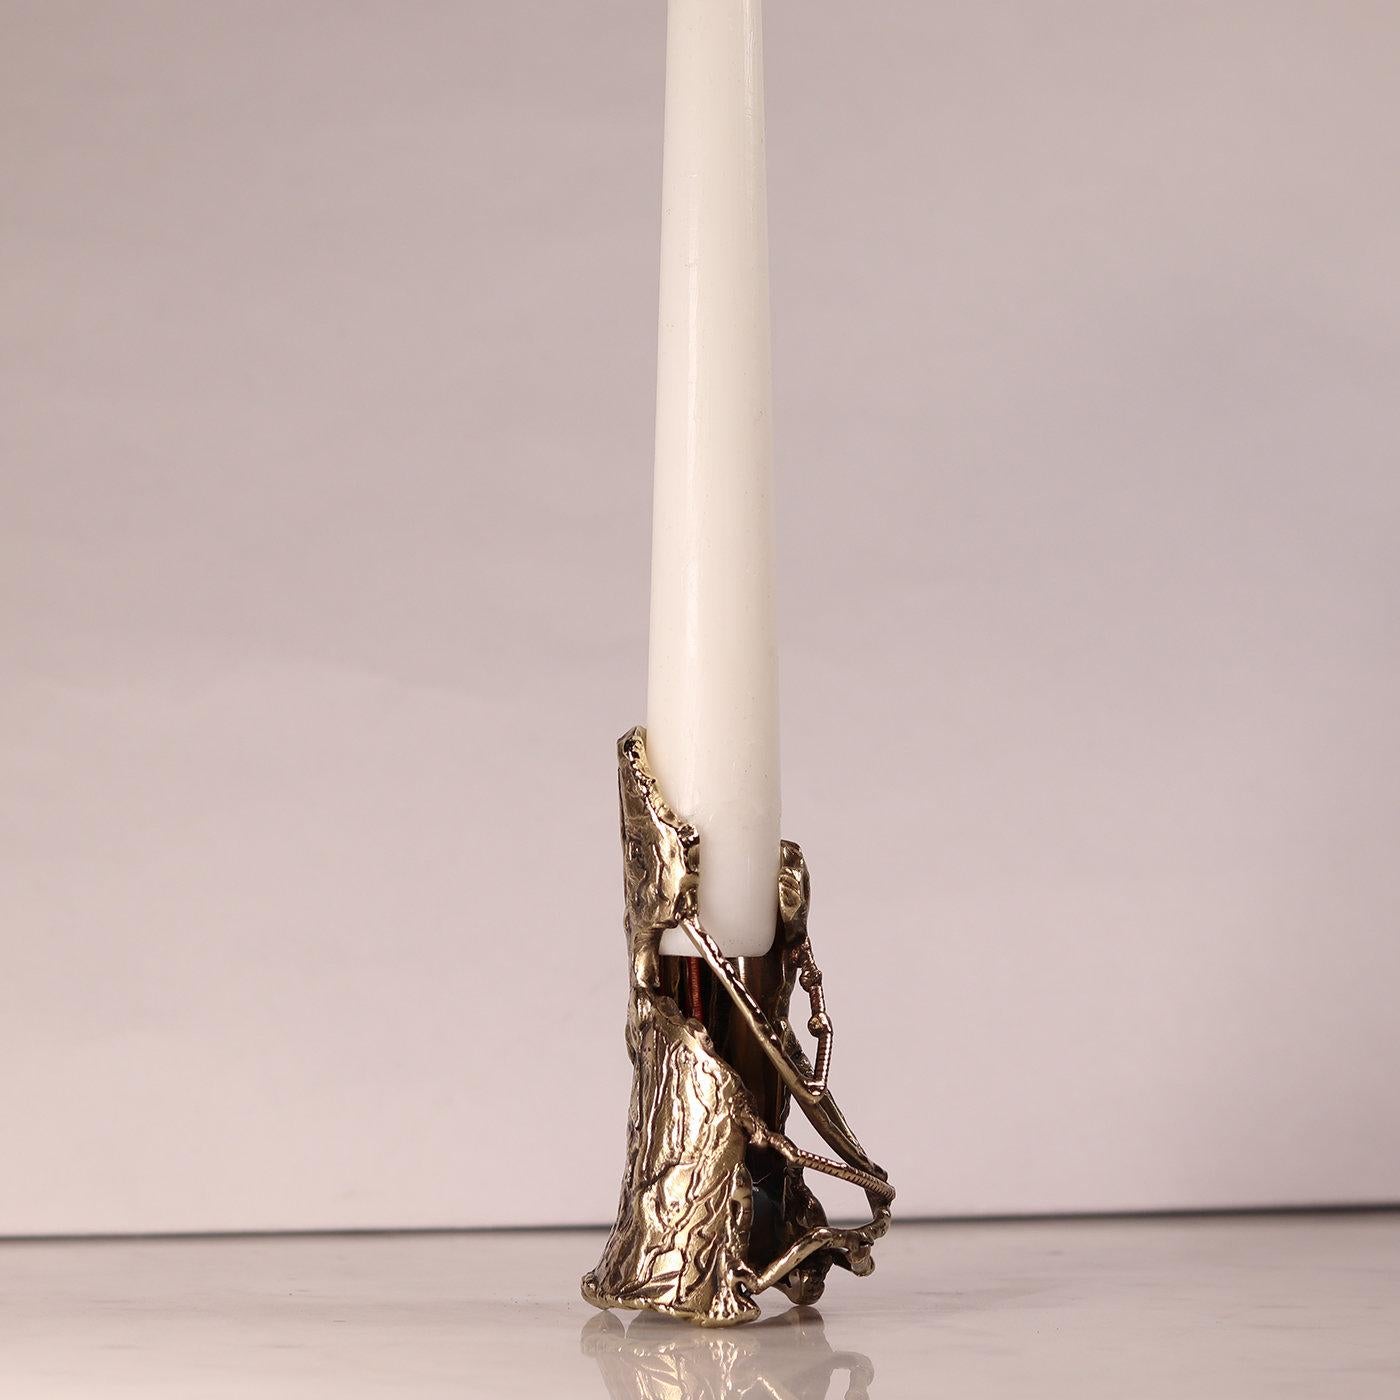 Nature changes shape and sheds its skin, leaving traces of this change on the ground. The Underwood Candlestick is made of flame-shaped brass that is beaten by hand, designed to resemble pieces of bark that have fallen off a tree. Finished with